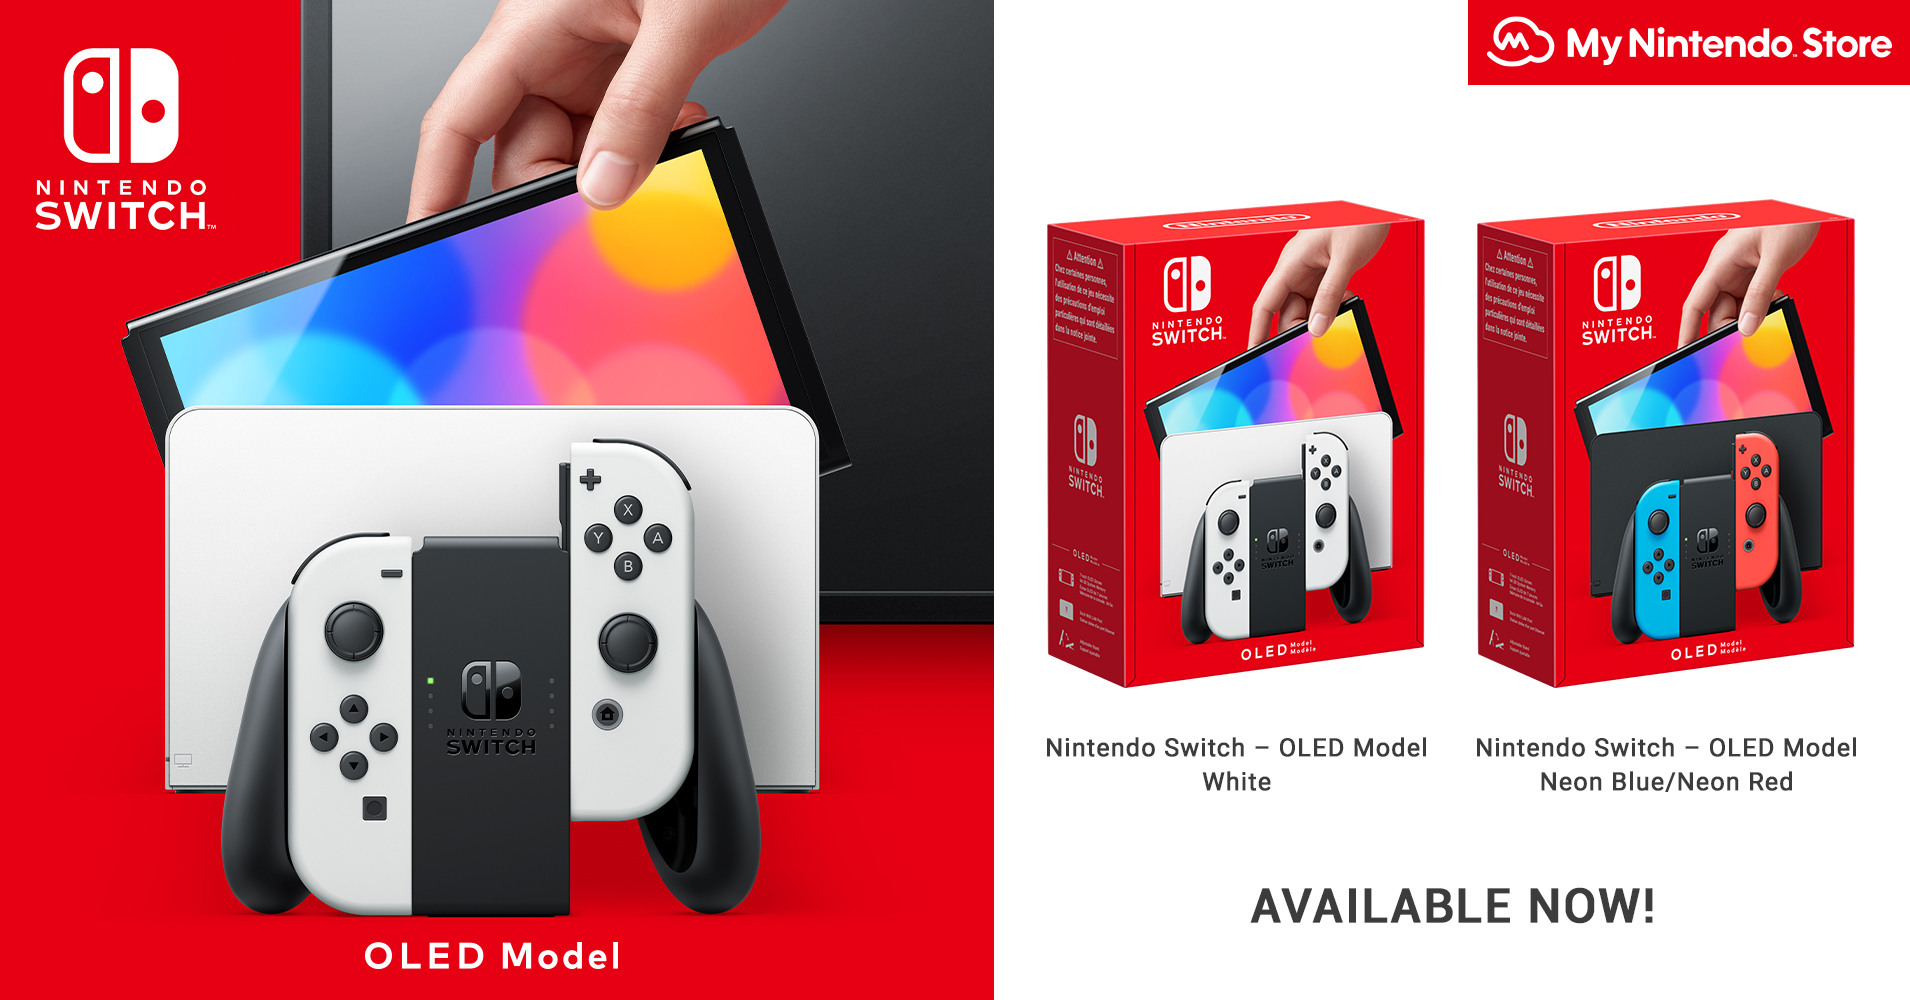 Nintendo Uk Back In Stock Nintendo Switch Oled Model Featuring A Vibrant 7 Inch Oled Screen With Vivid Colours Is Available On My Nintendo Store Now T Co Ovvt8in2wf T Co Ibyib41lf0